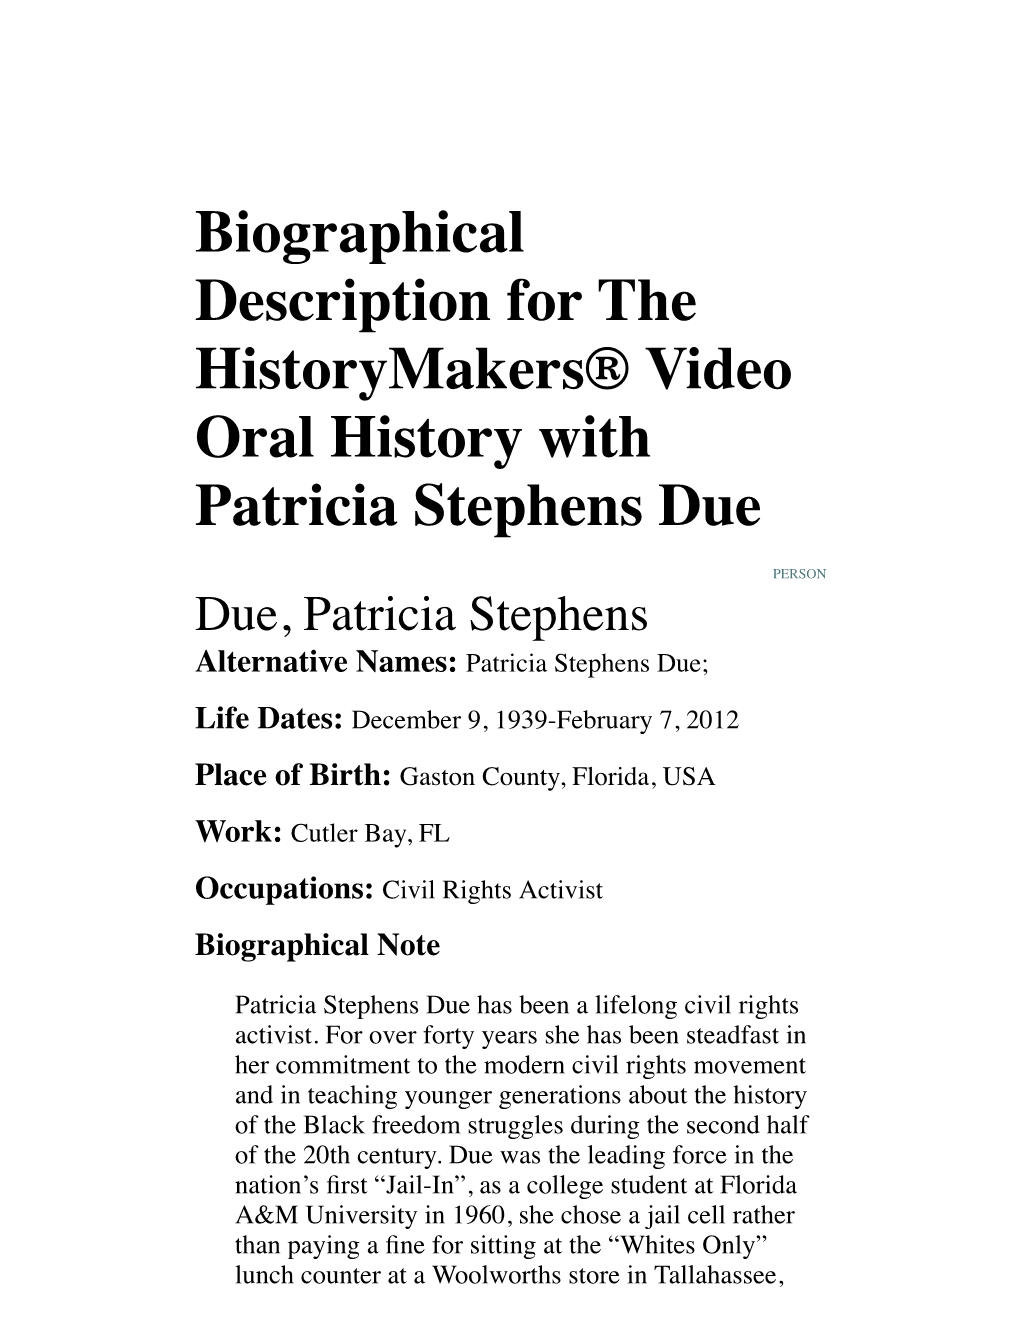 Biographical Description for the Historymakers® Video Oral History with Patricia Stephens Due